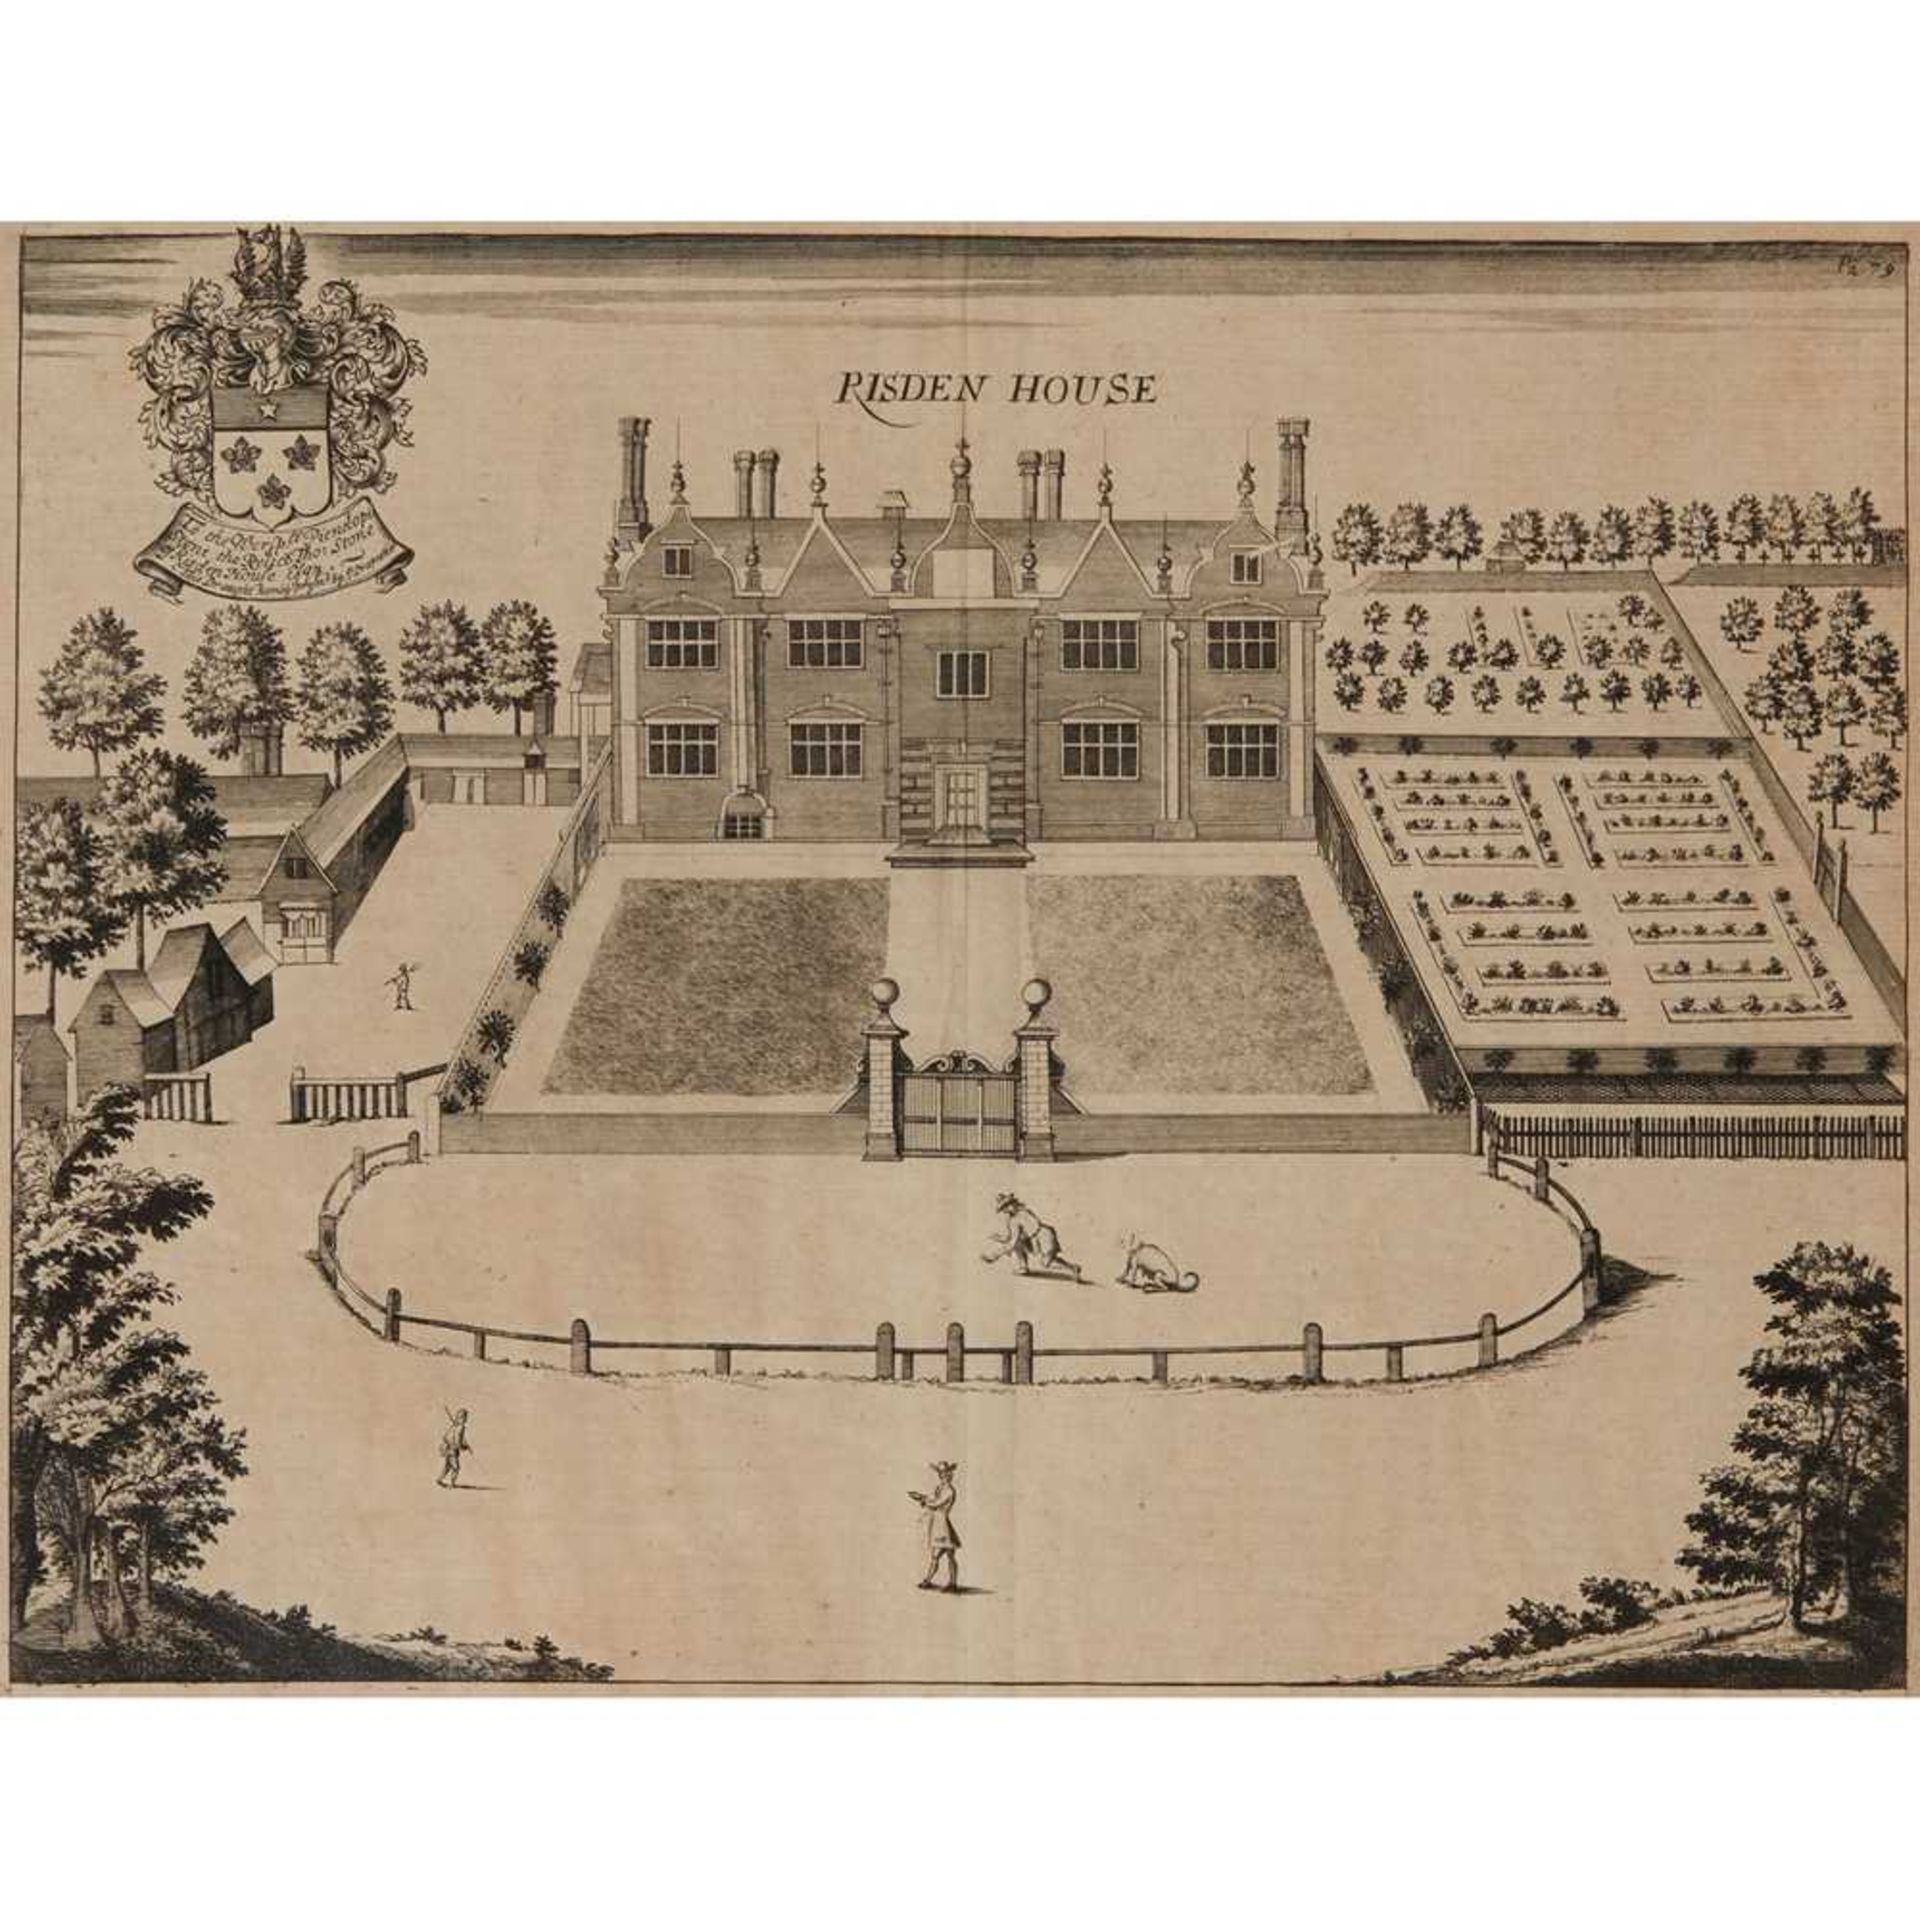 EIGHT ENGRAVINGS OF BIRDS EYE VIEWS OF COUNTRY HOUSES, FROM HENRY CHAUNCY'S 'THE HISTORICAL ANTIQUI - Image 20 of 52